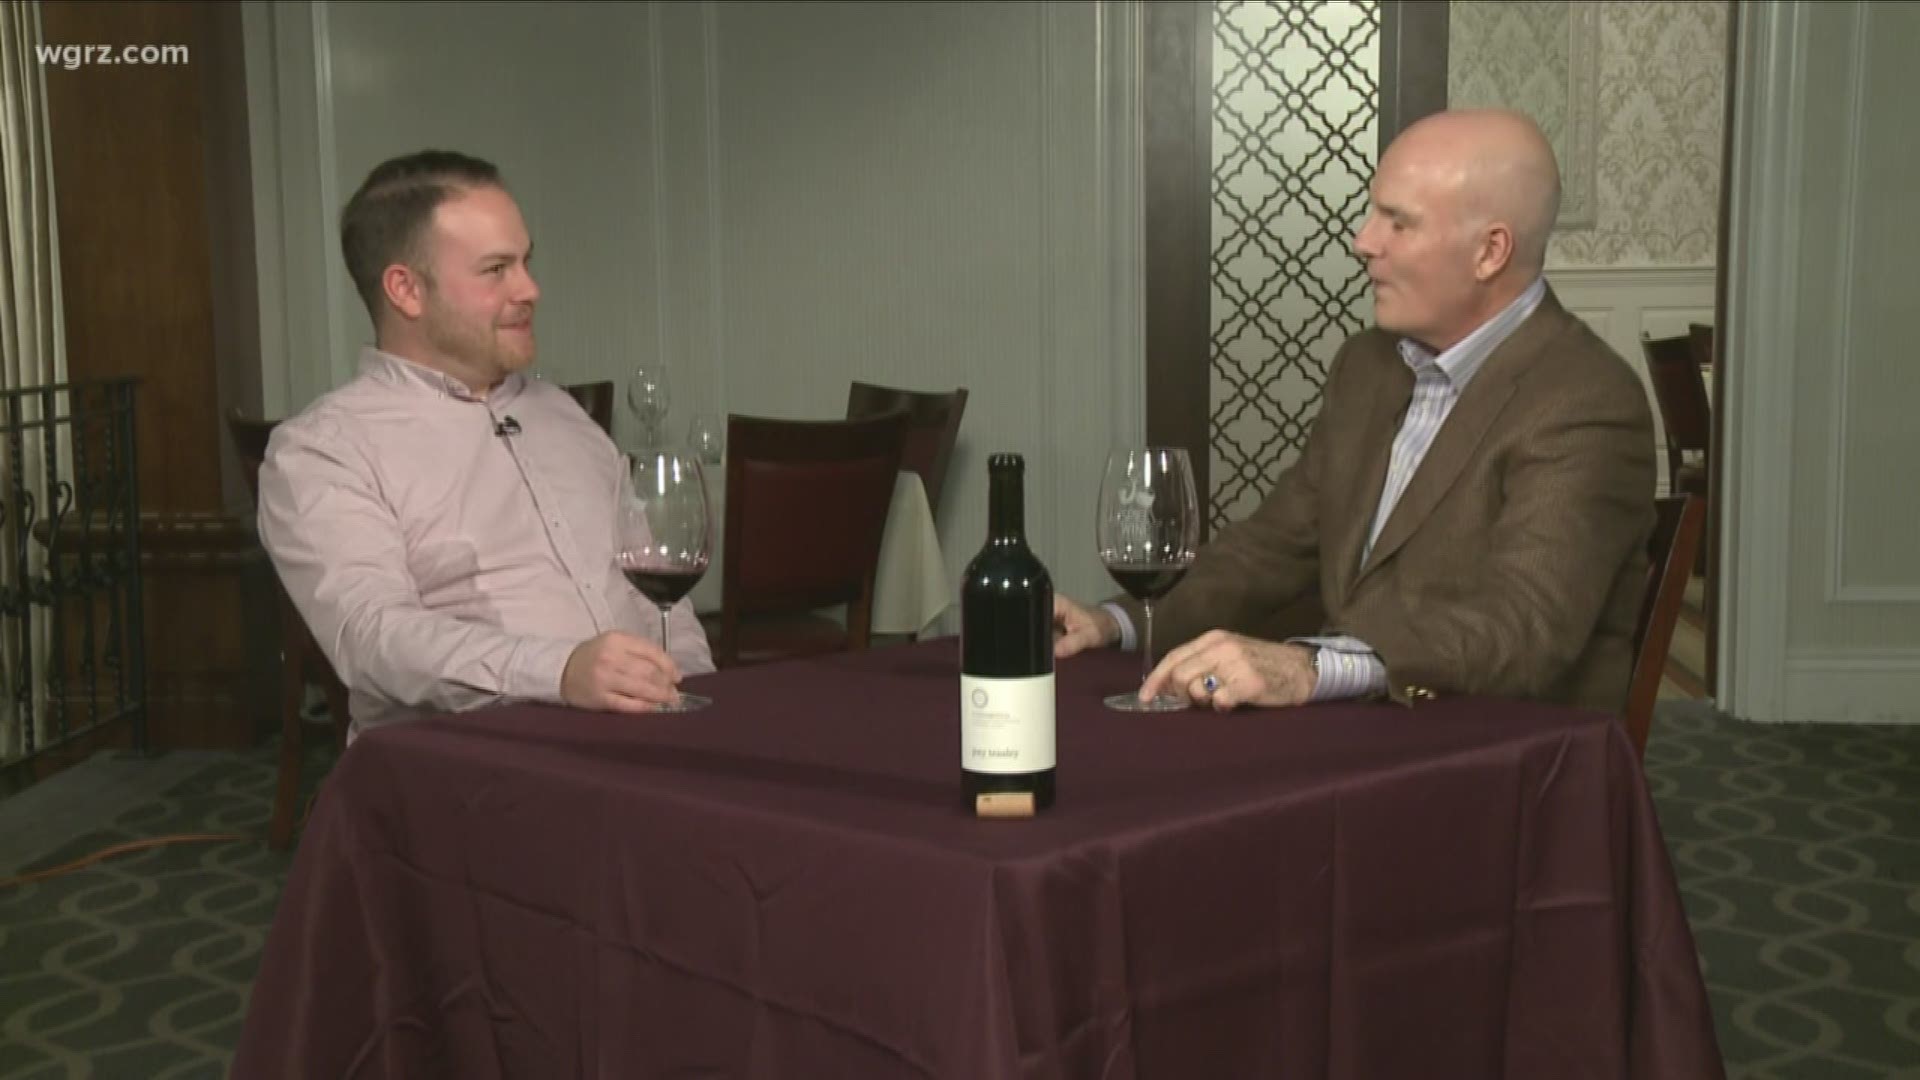 Spiel The Wine - January 11 - Segment 4 (THIS VIDEO IS SPONSORED BY THE GLOBAL GROUP)